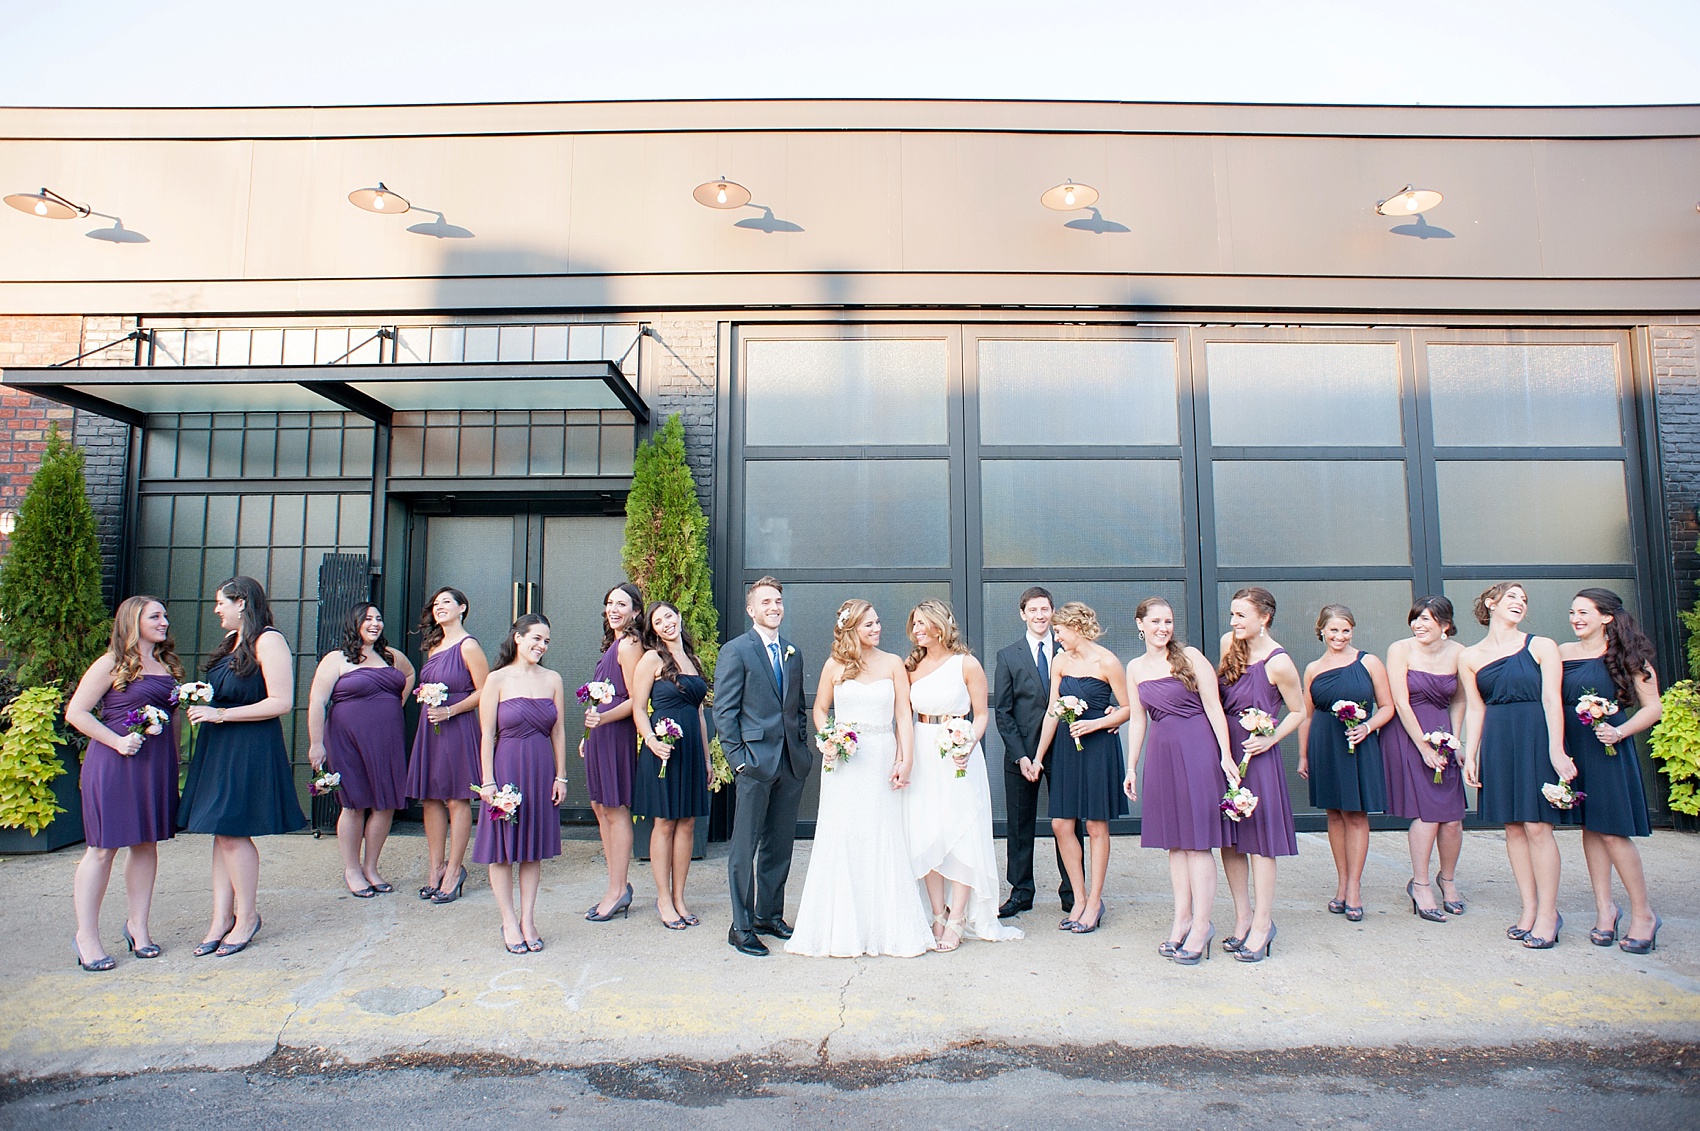 Flowers by Foxglove and Ann Taylor bridesmaids dresses in navy and purple for a lesbian wedding at 501 Union, Brooklyn, NY. Photography by Mikkel Paige, NYC wedding photographer.